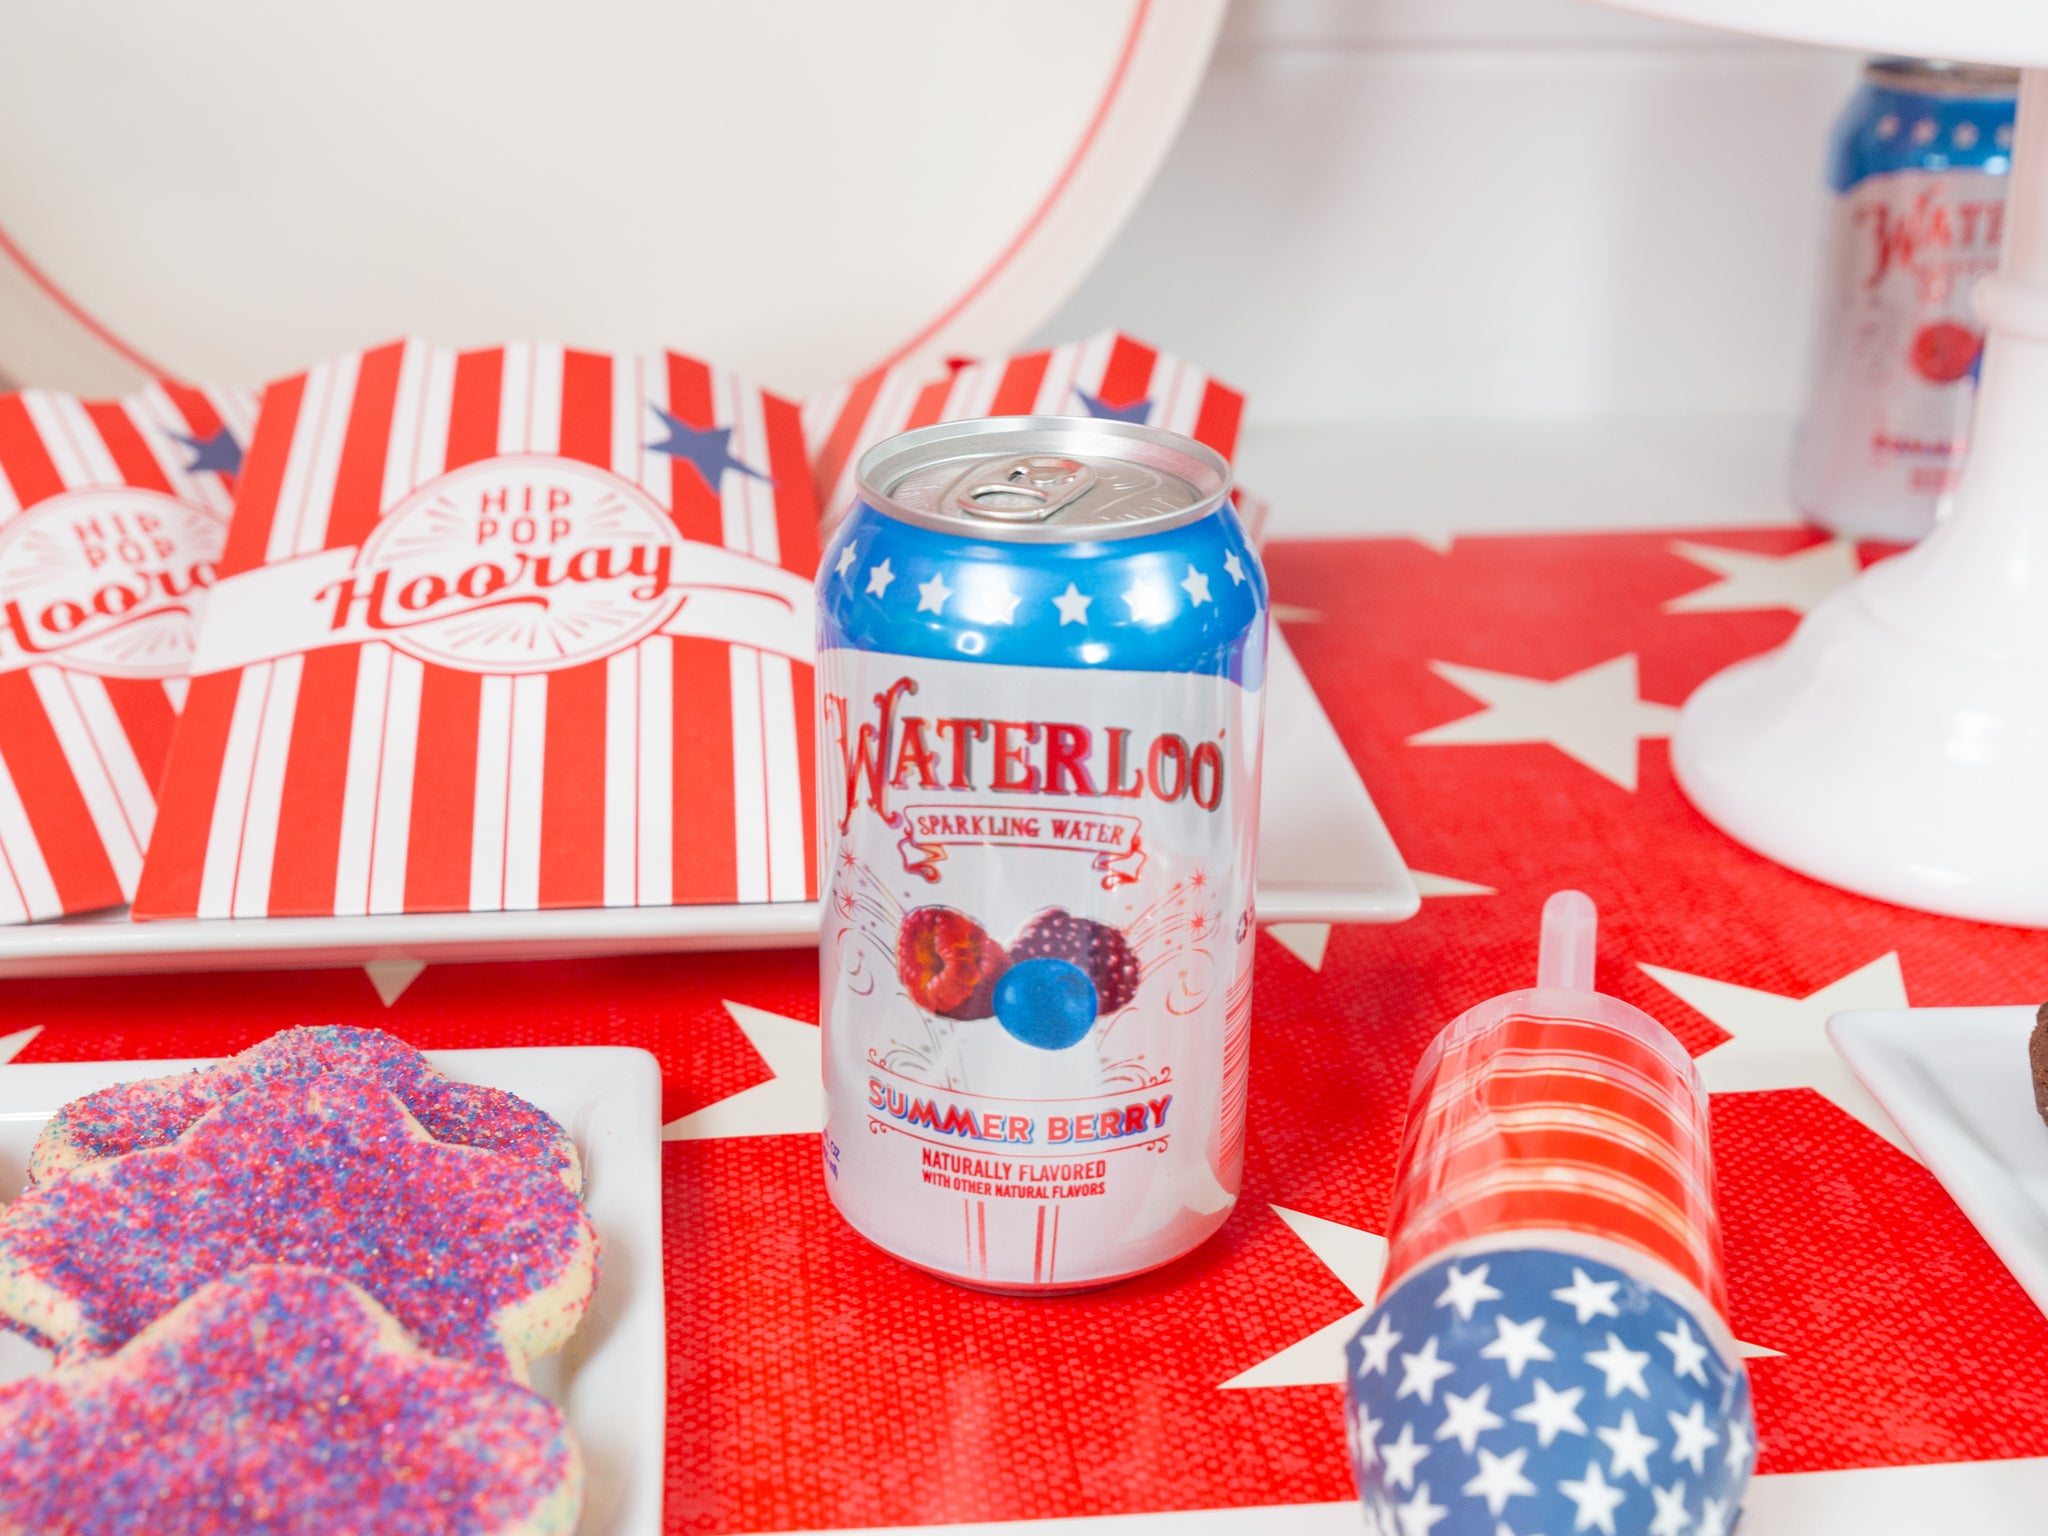 Waterloo sparkling water | The Party Darling